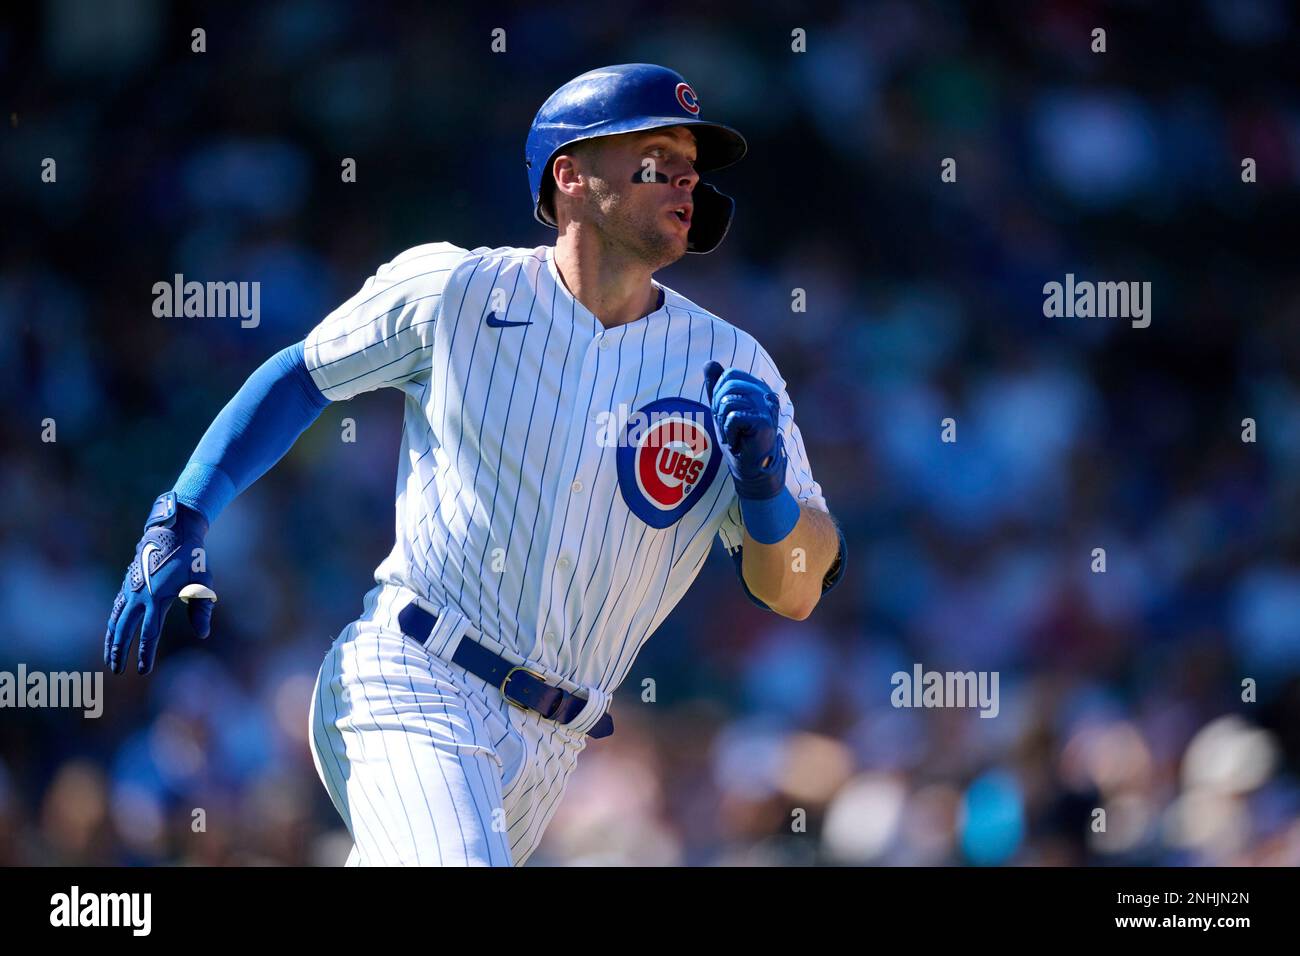 Chicago Cubs Nico Hoerner (2) runs to first base during a Major